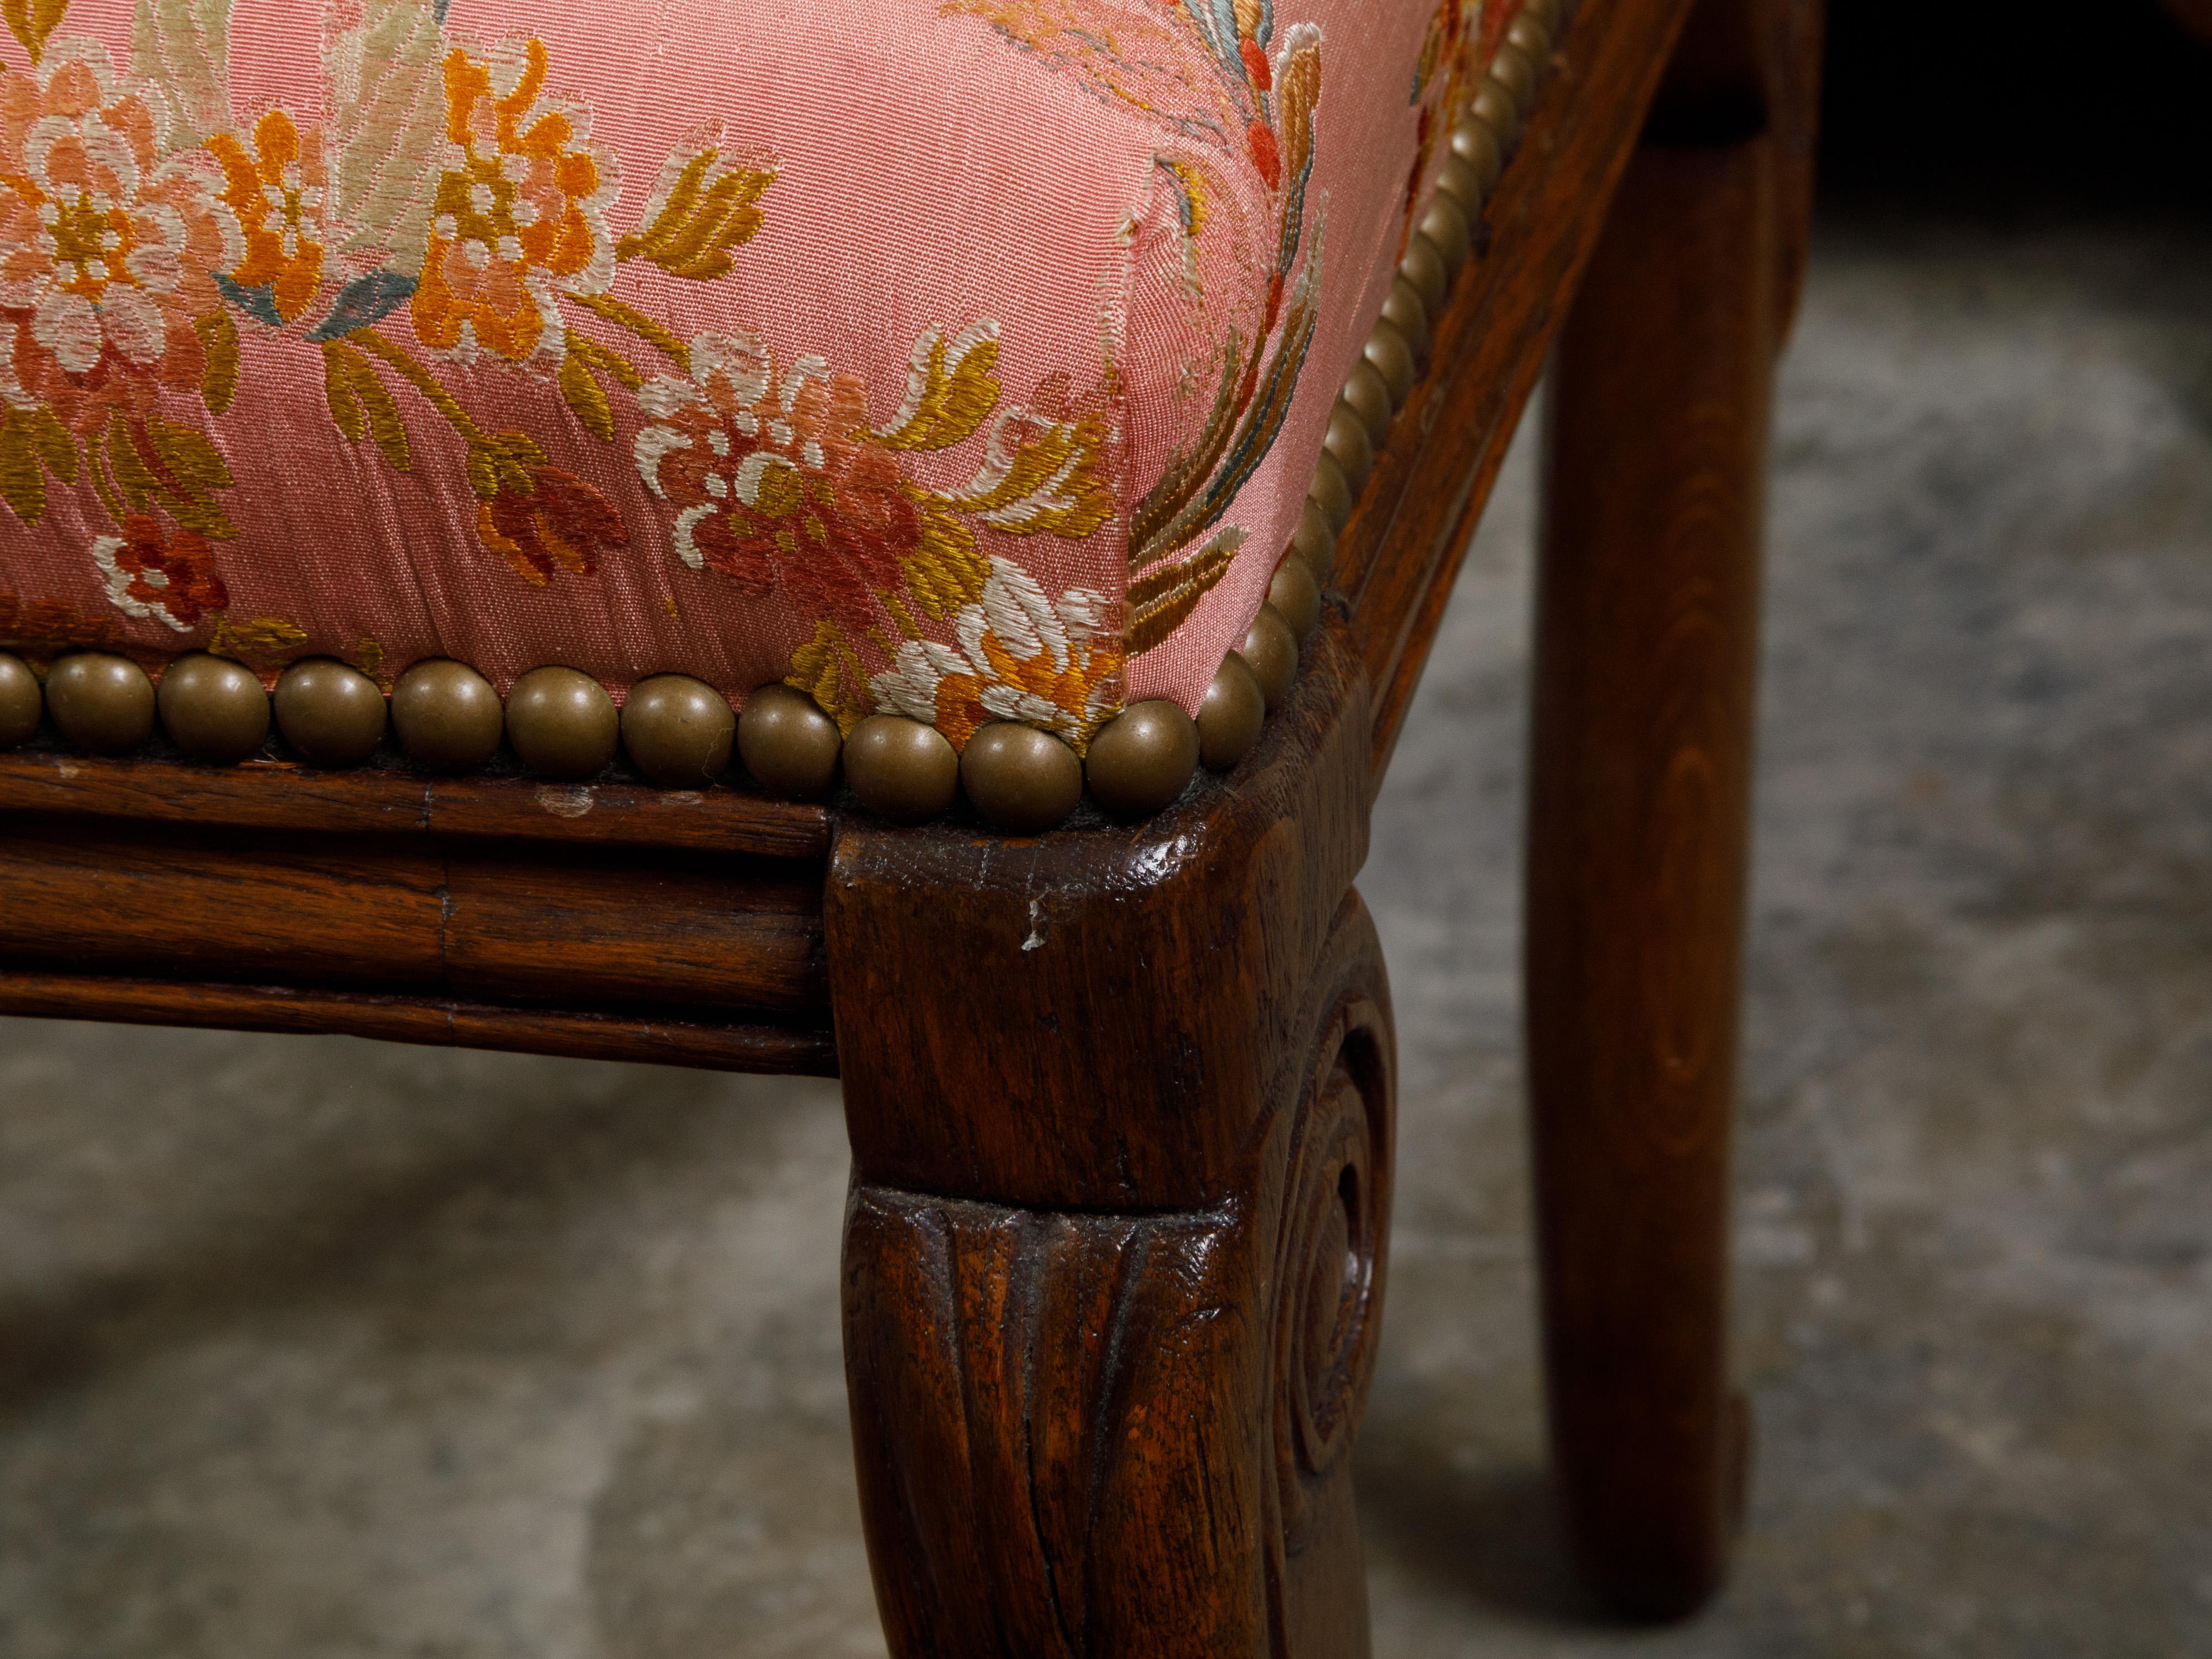 English 1820s Mahogany Stool with Floral Themed Upholstery and Cabriole Legs In Good Condition For Sale In Atlanta, GA